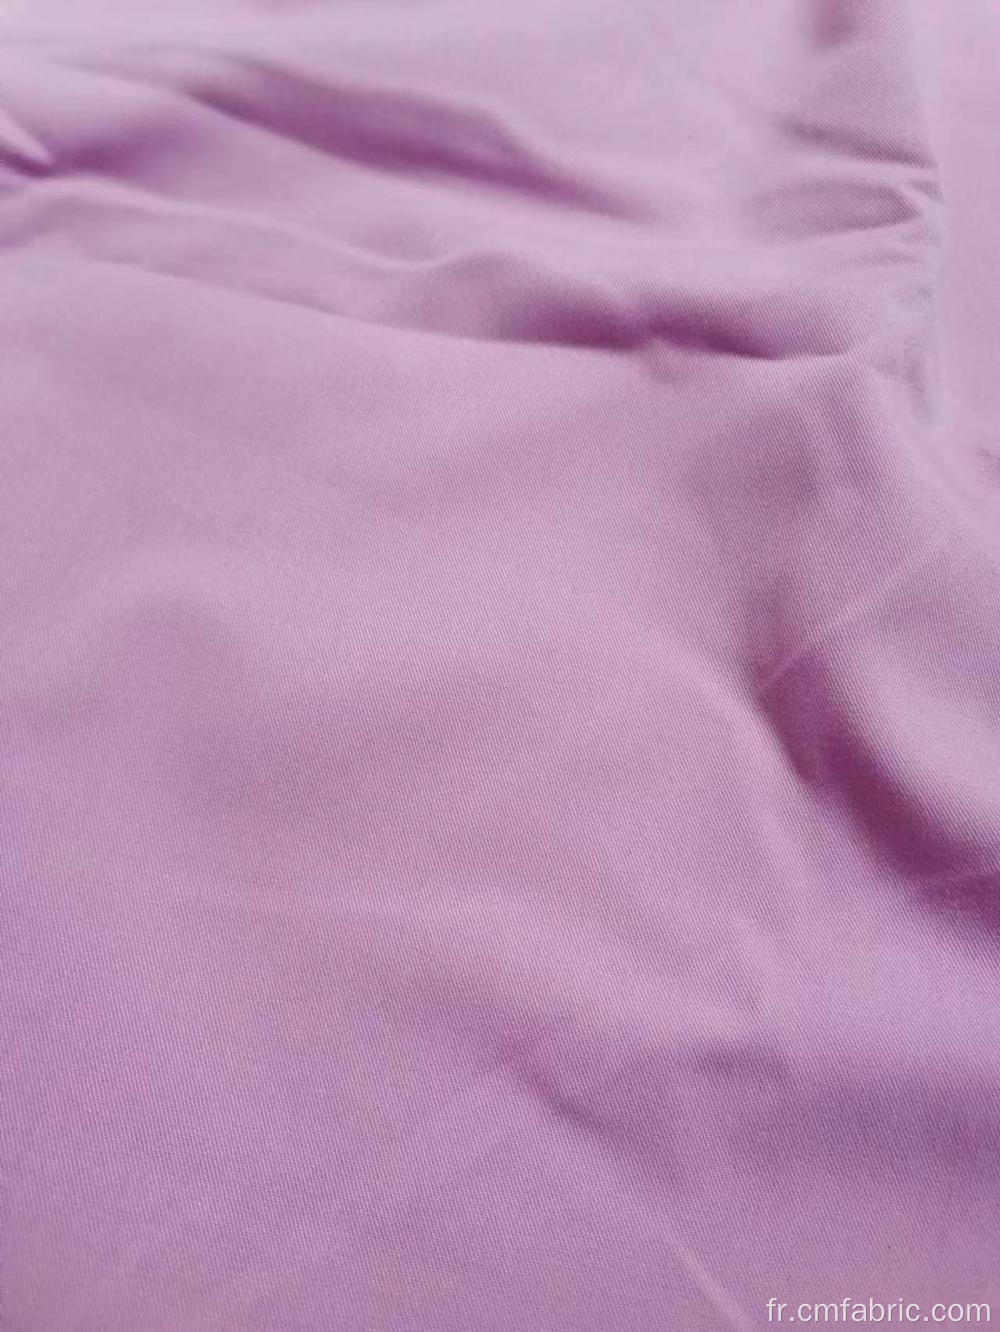 Polyester Woven Rayon Waft Spandex Twill Plain Diné Tissu